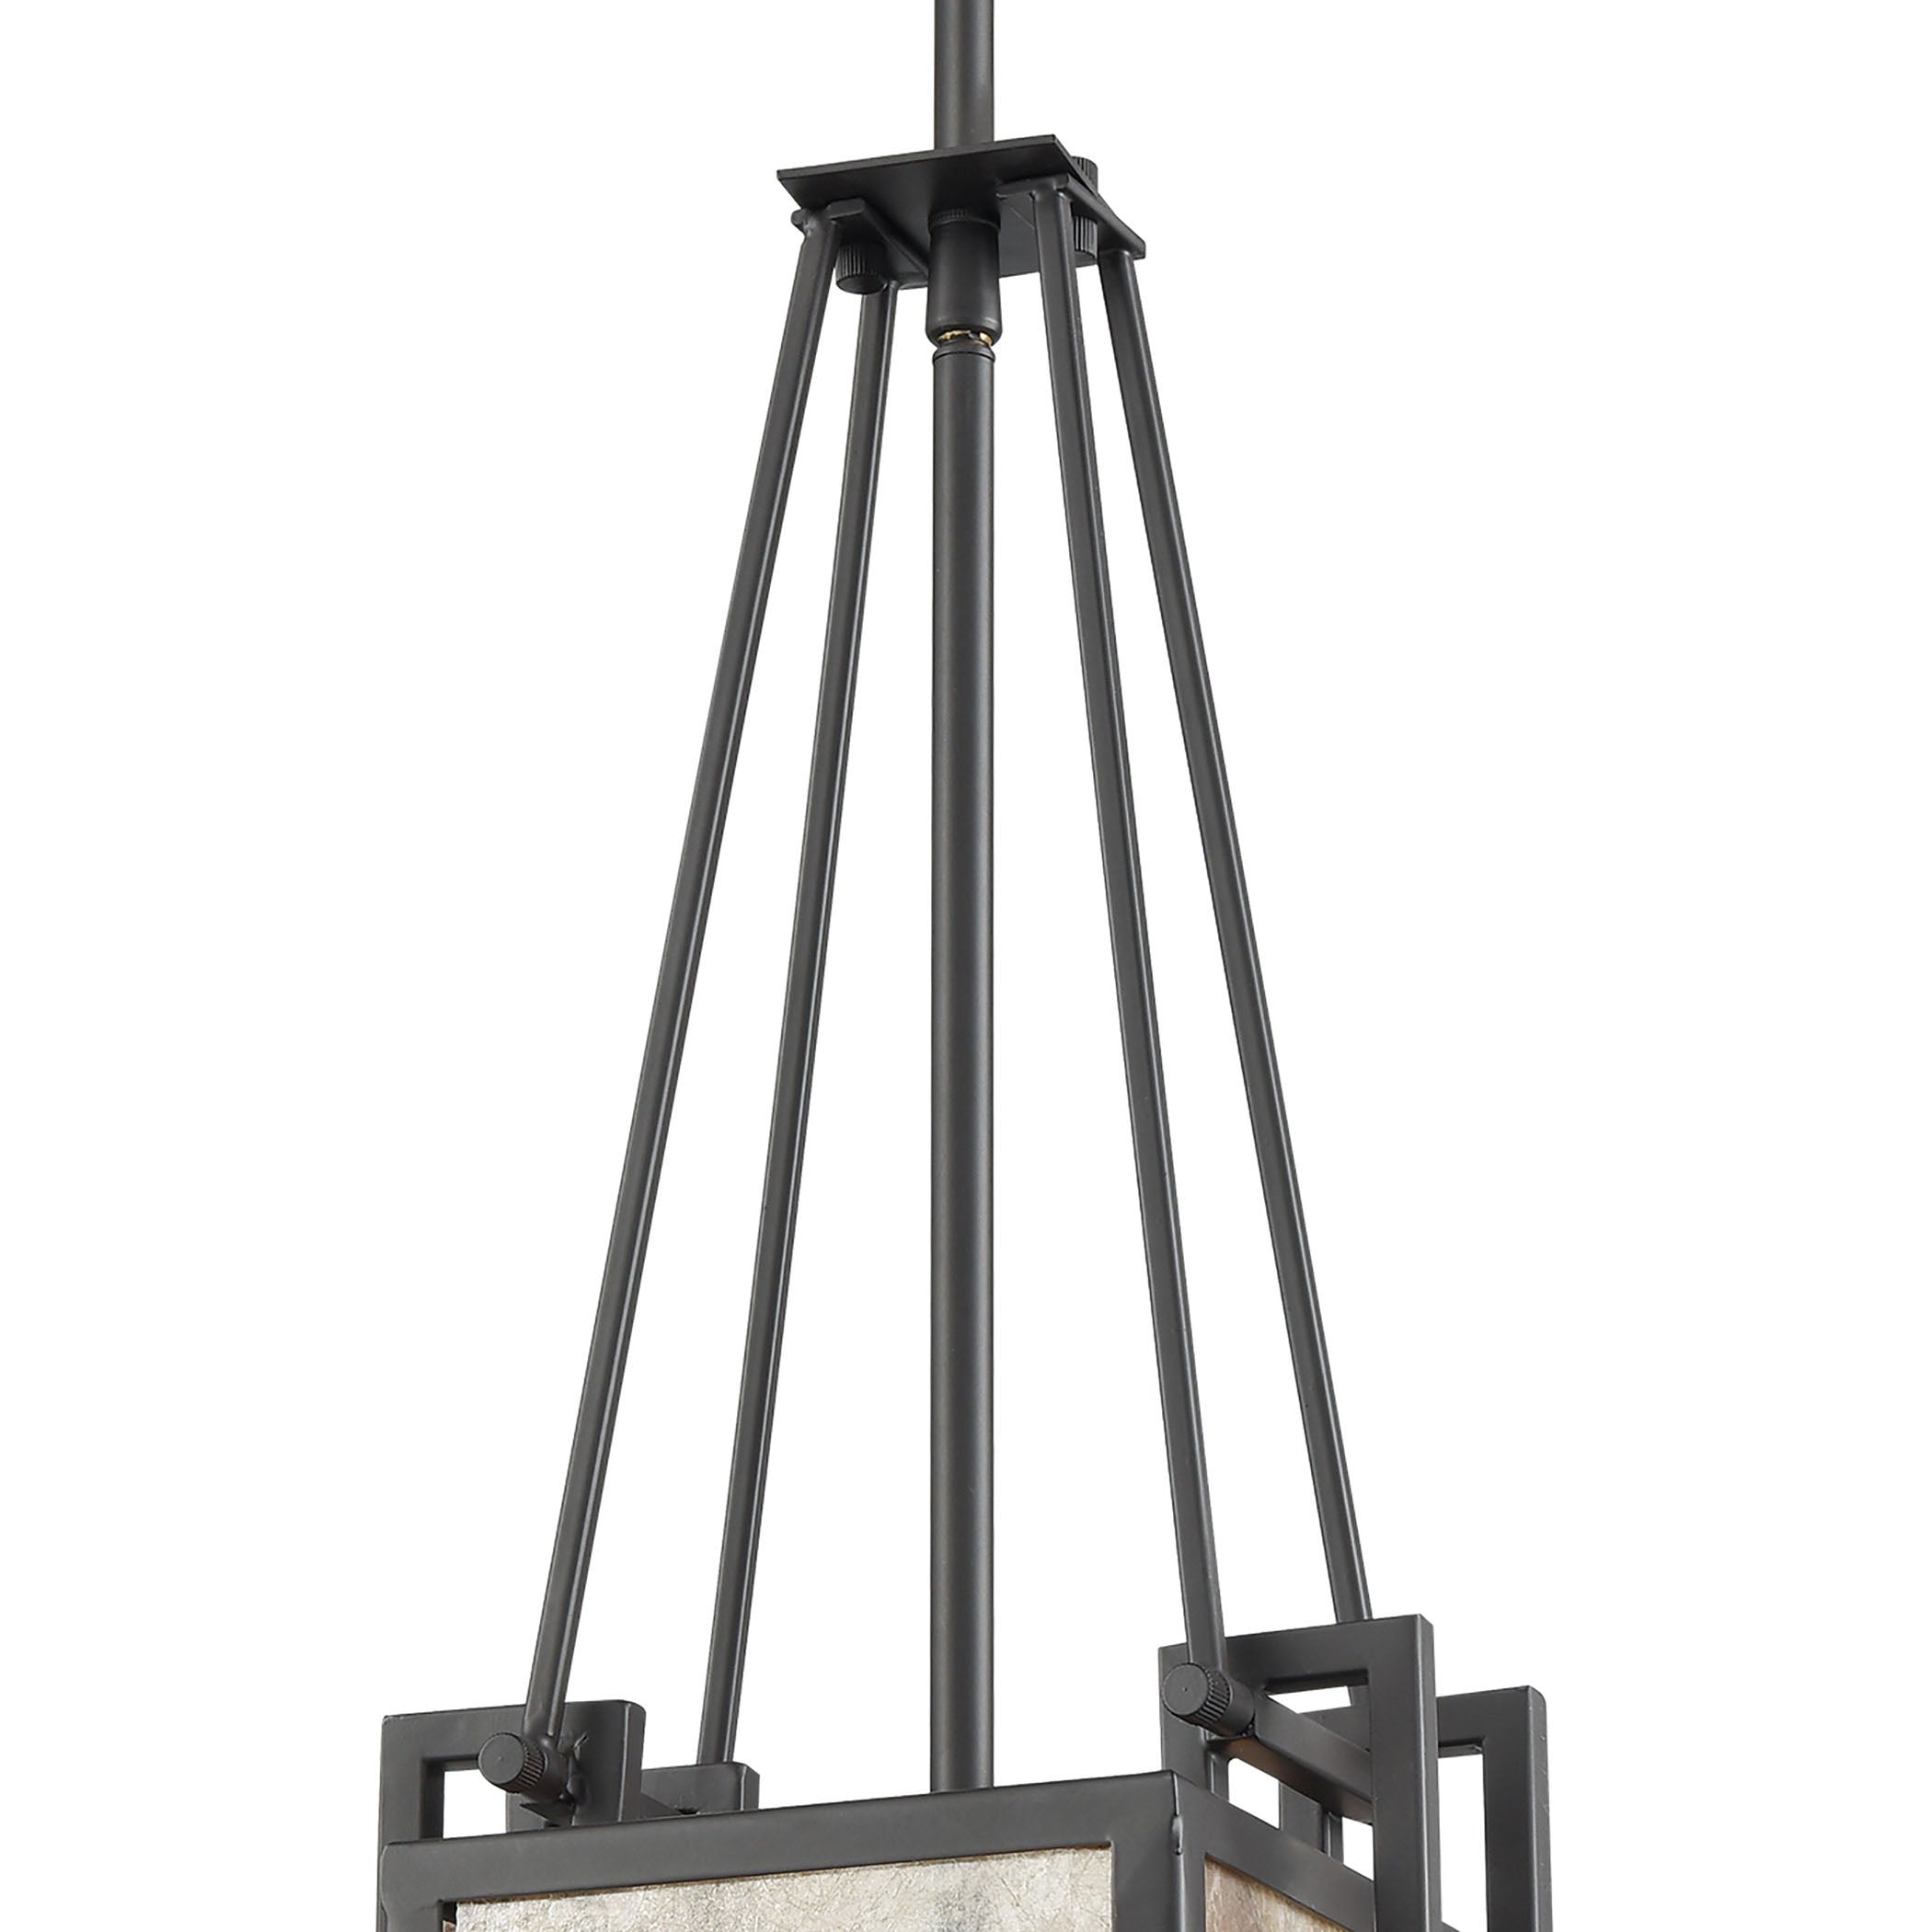 ELK Lighting 16183/1 Stasis 1-Light Mini Pendant in Oil Rubbed Bronze with Tan and Clear Mica Shade